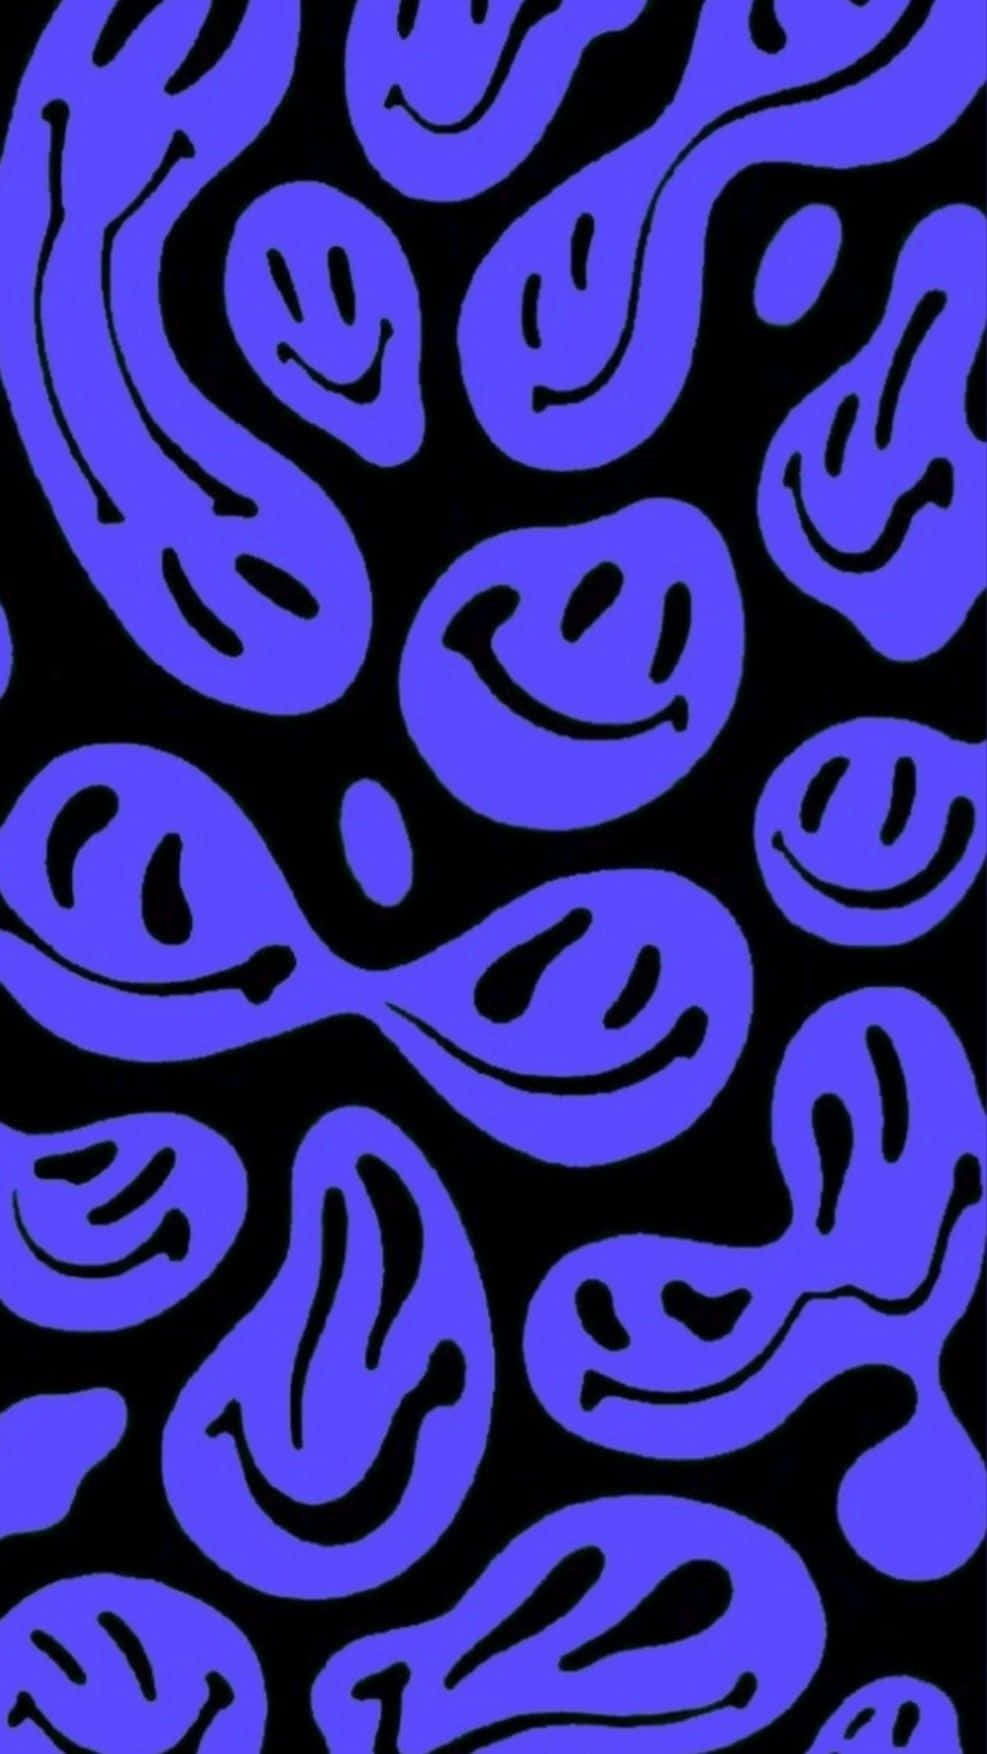 Blue_ Smiley_ Faces_ Pattern_ Trippy_i Phone_ Background.jpg Wallpaper